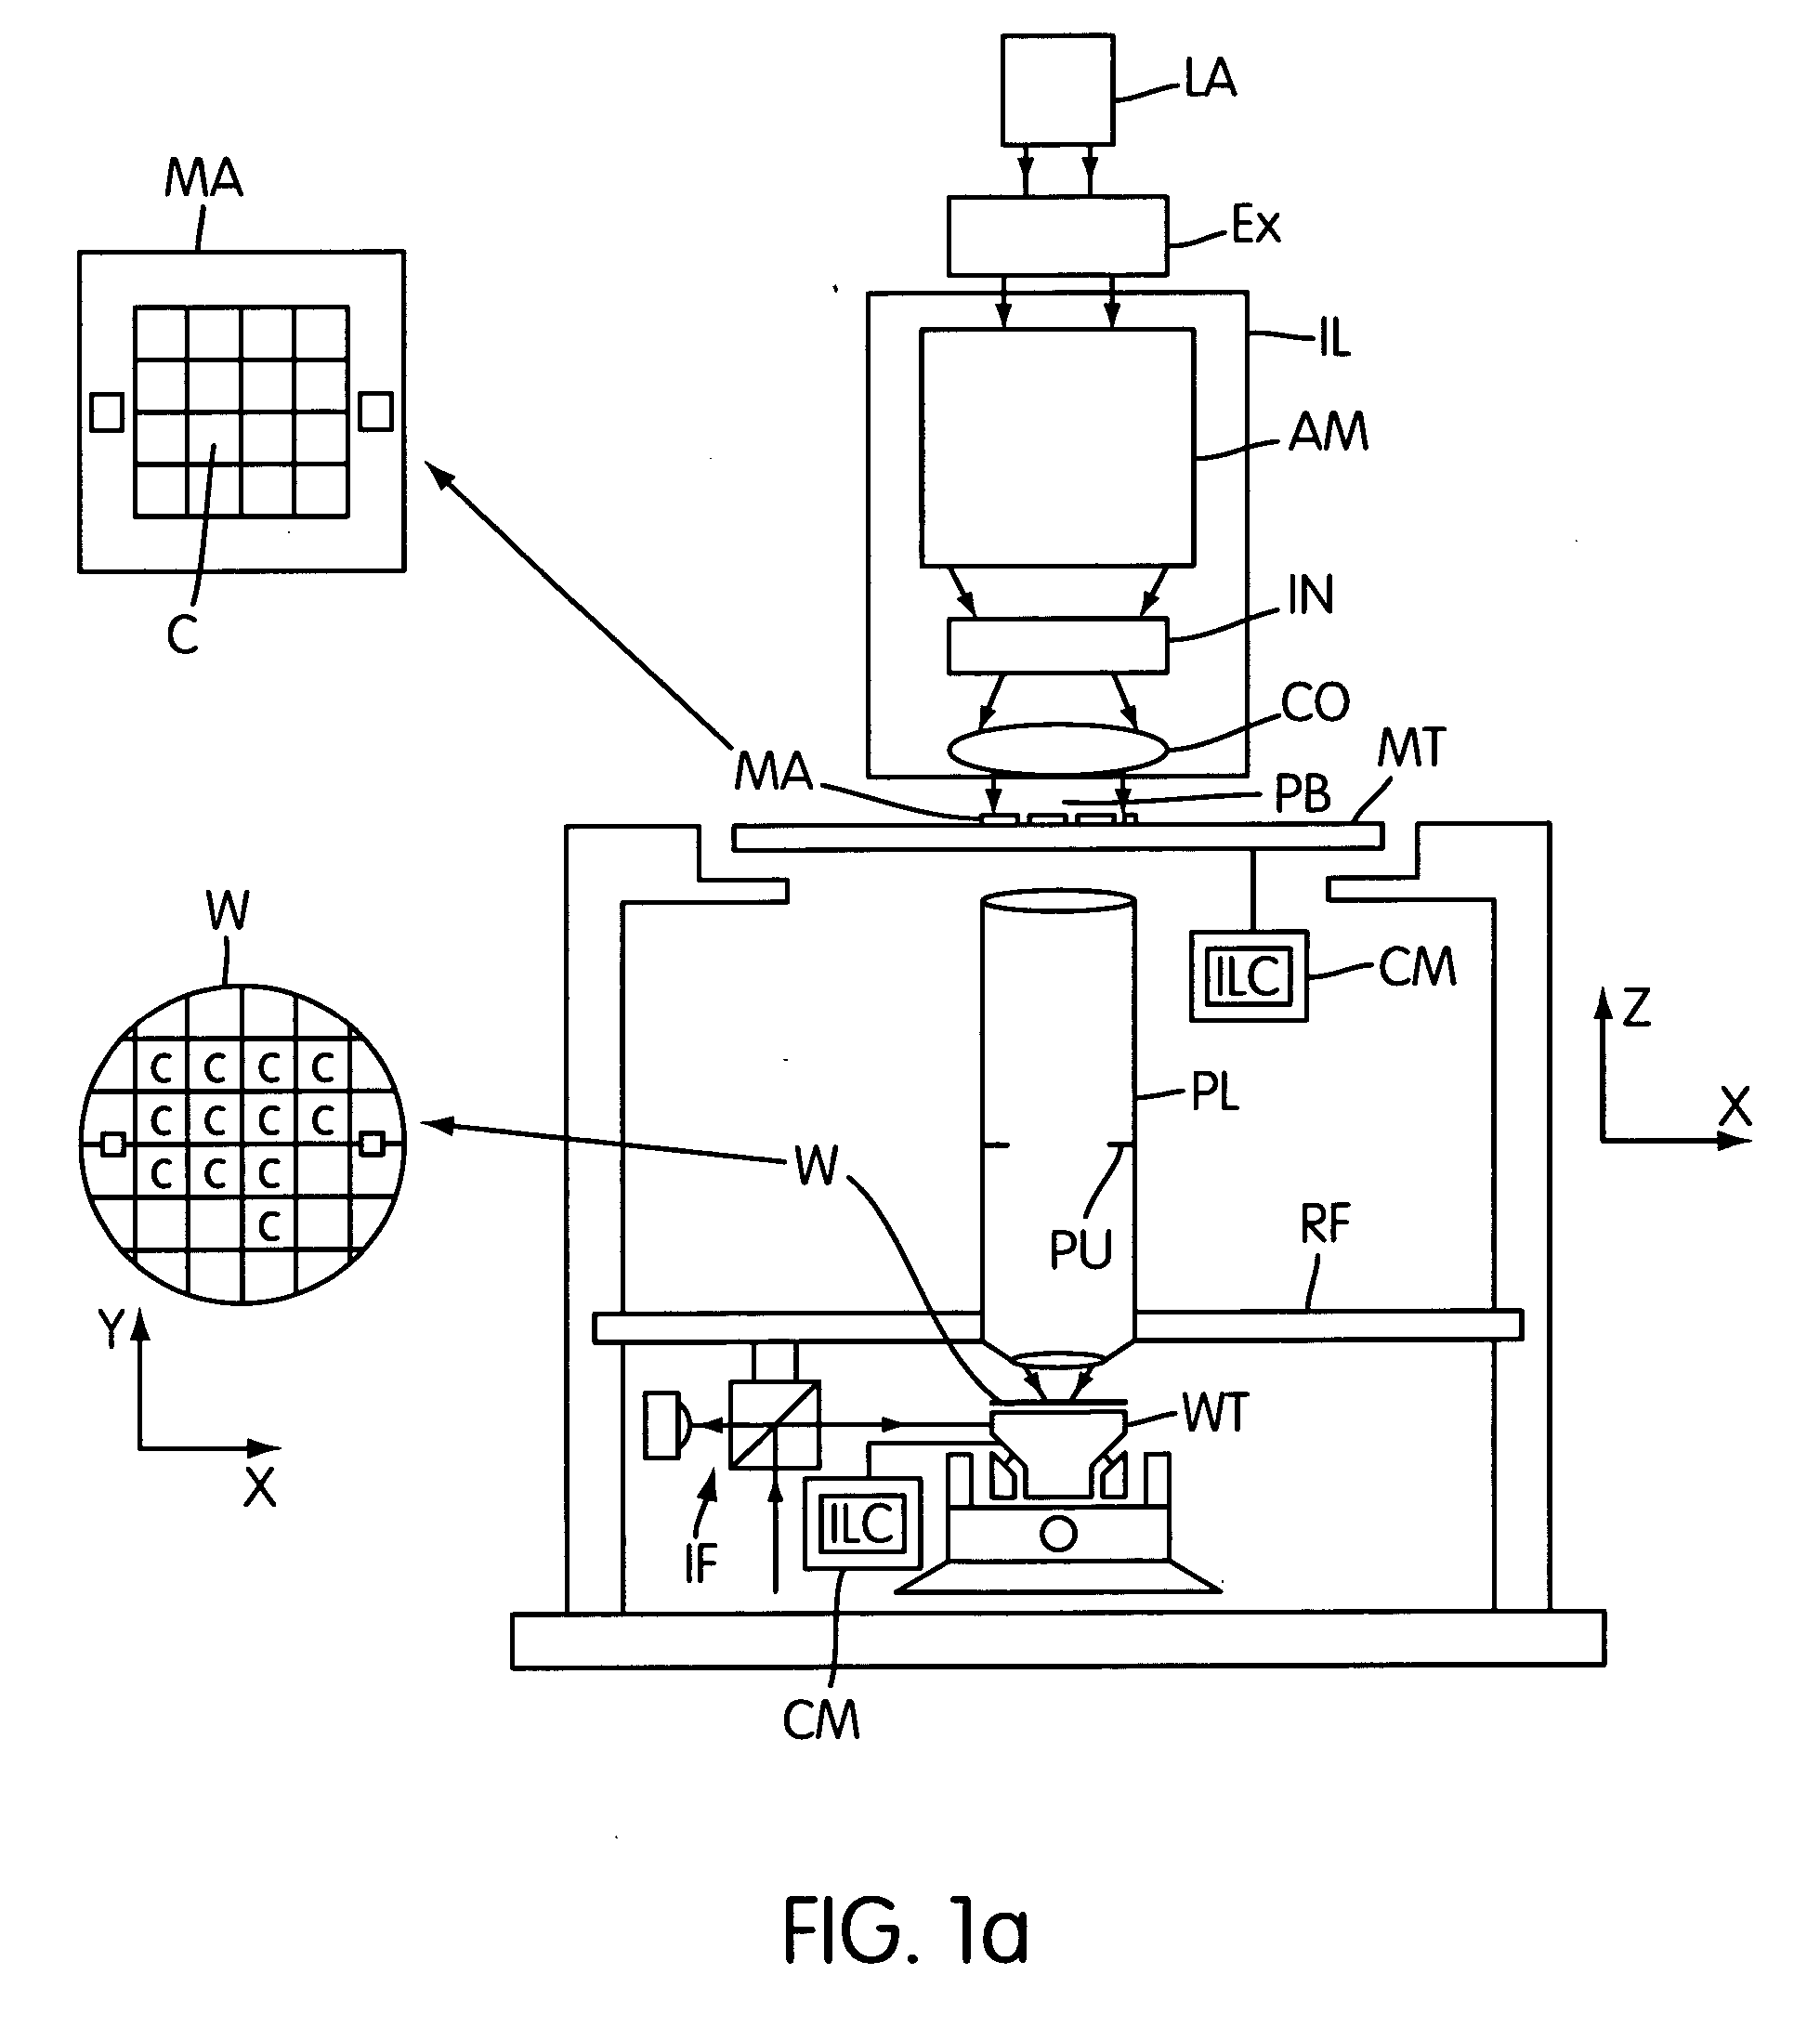 Method of adaptive interactive learning control and a lithographic manufacturing process and apparatus employing such a method